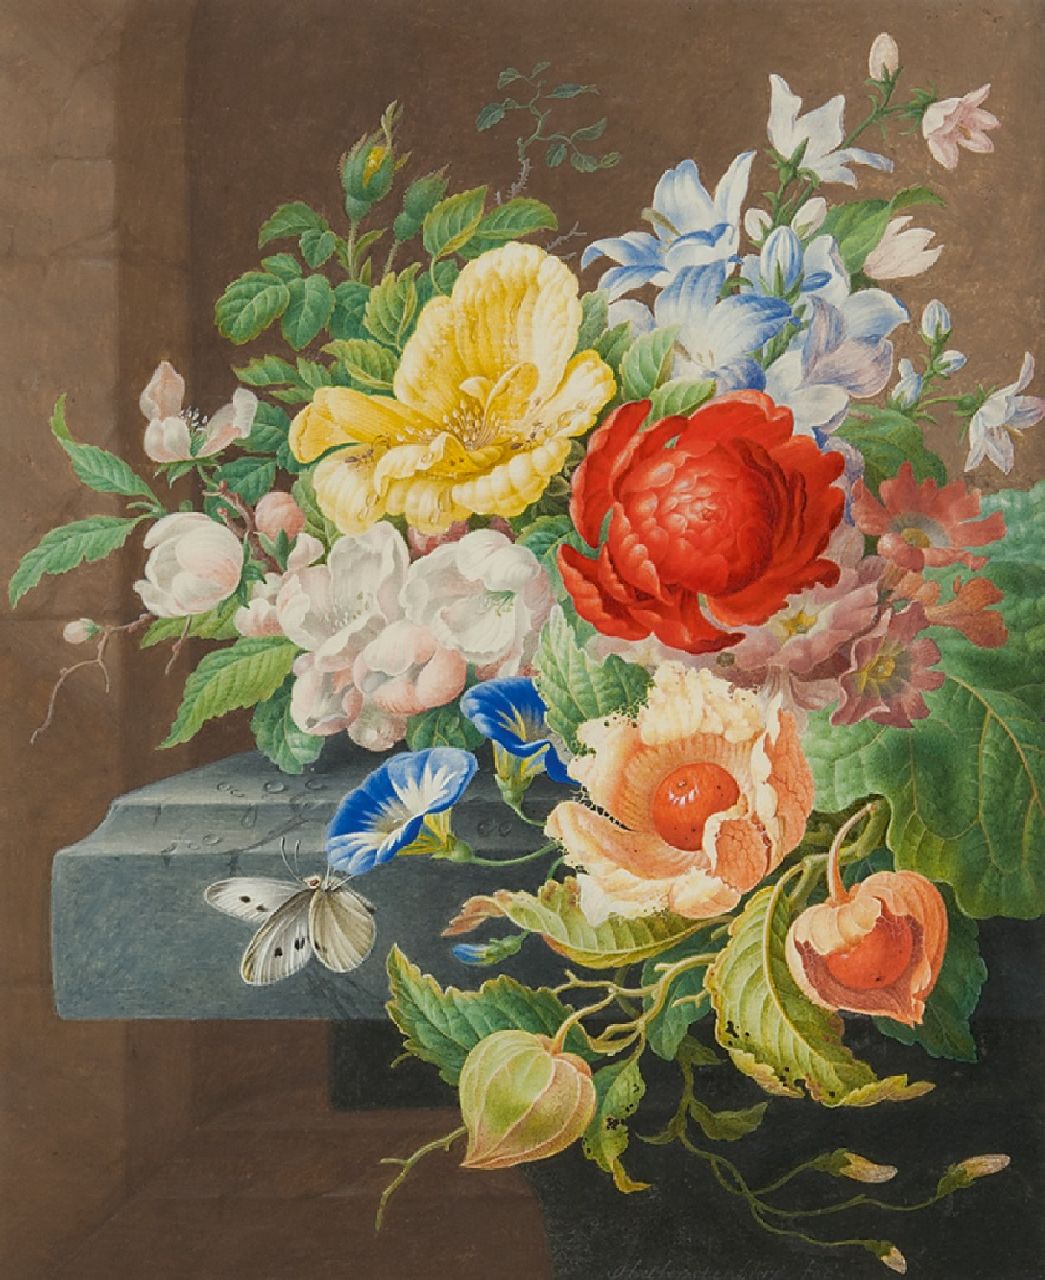 Herman Henstenburgh | Still life with flowers and a butterfly, watercolour on paper, 31.0 x 25.5 cm, signed l.m. and te dateren ca. 1700